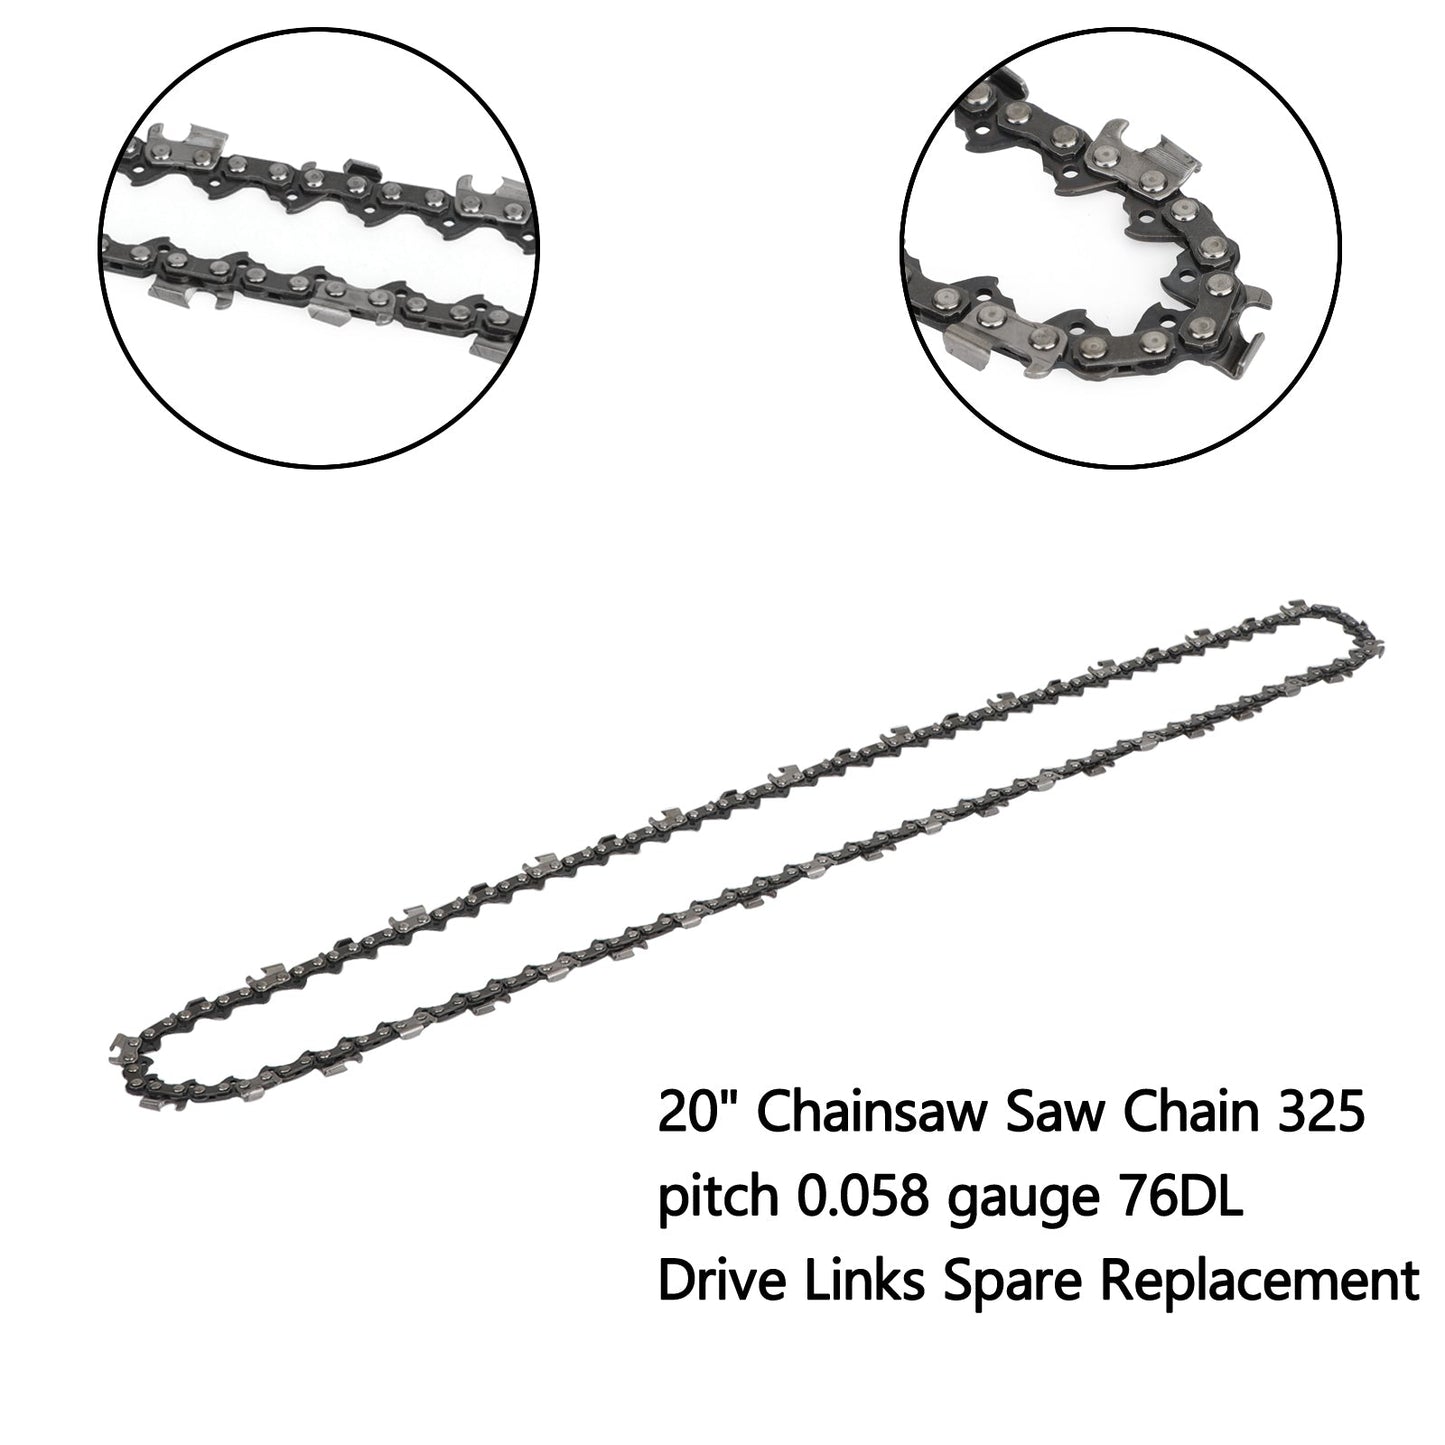 20" Chainsaw Saw Chain 325 pitch .058 gauge 76DL Drive Links Spare Replacement